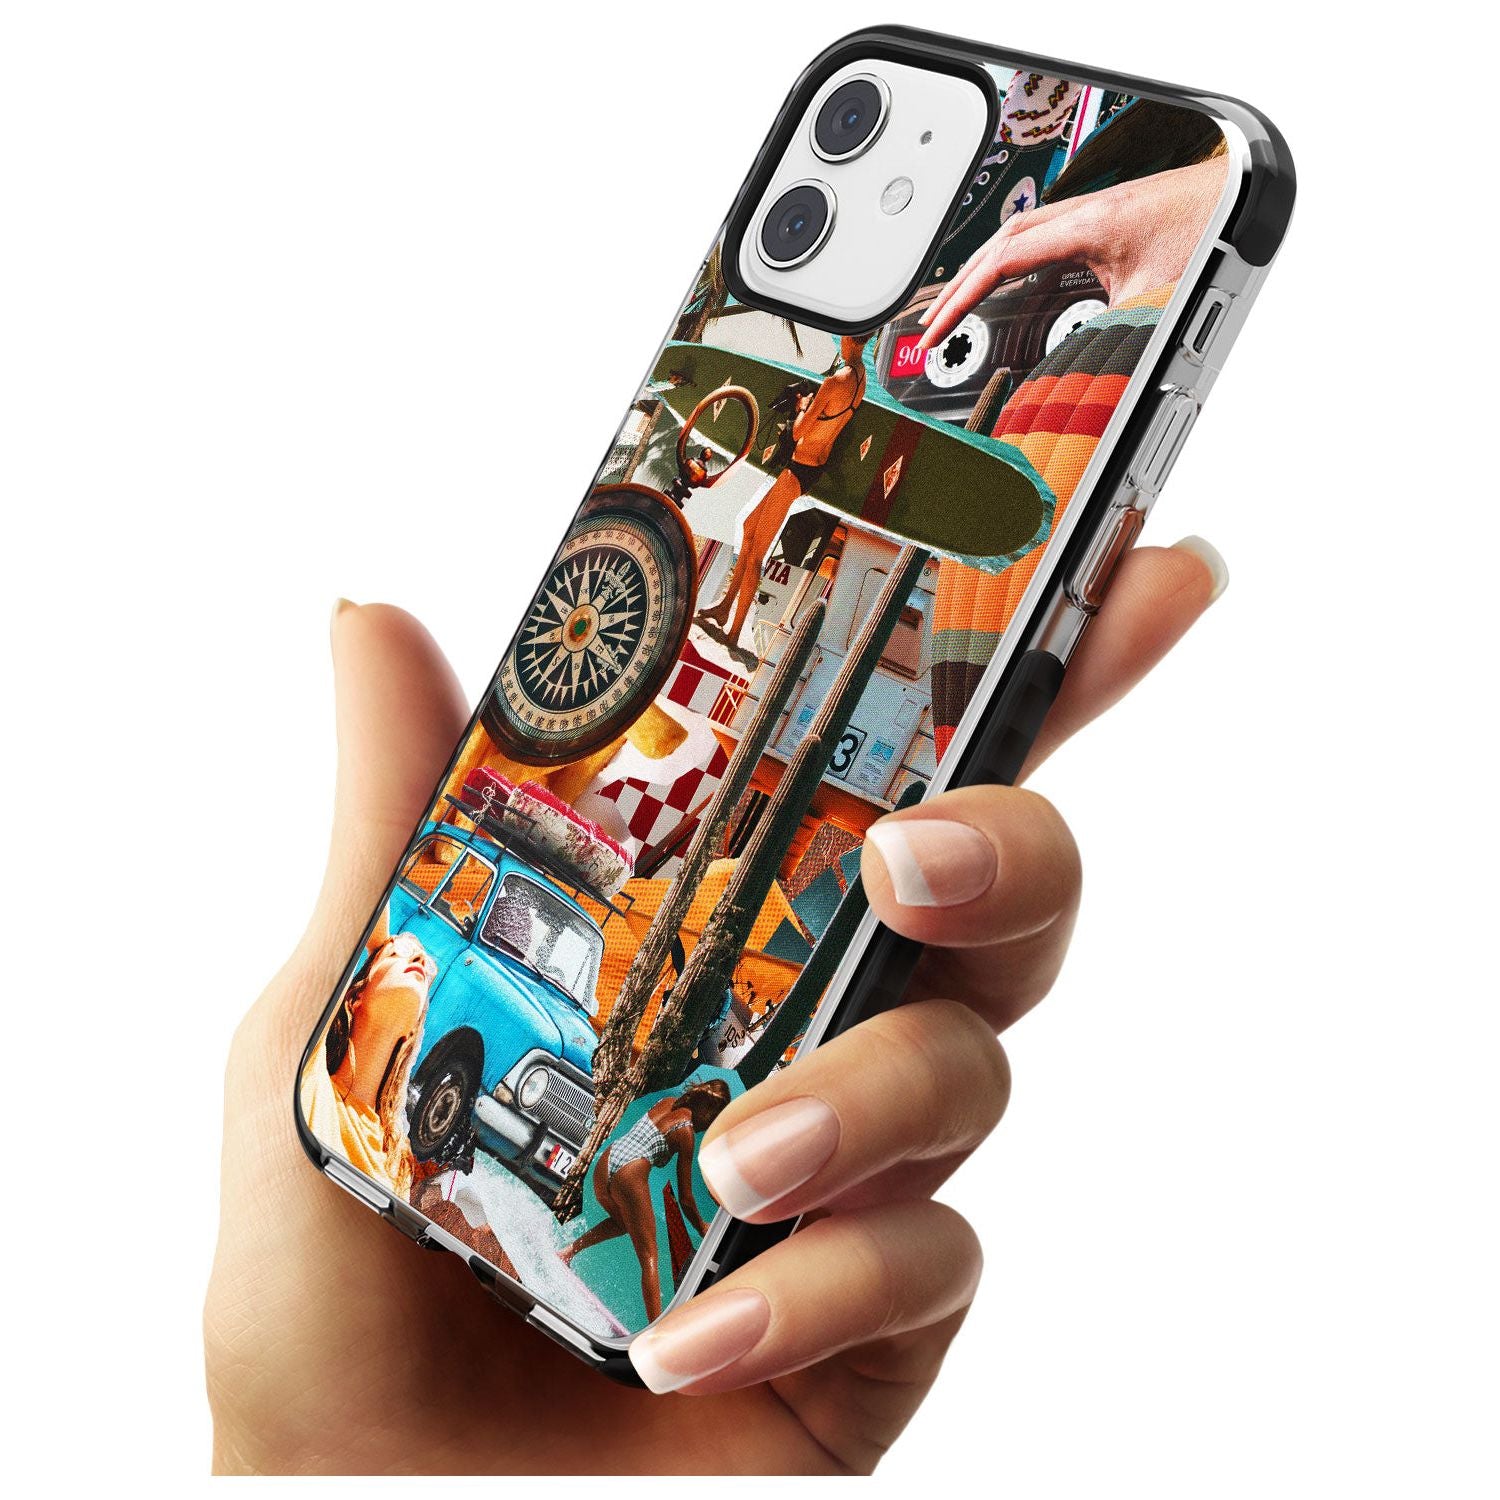 Vintage Collage: Road Trip Black Impact Phone Case for iPhone 11